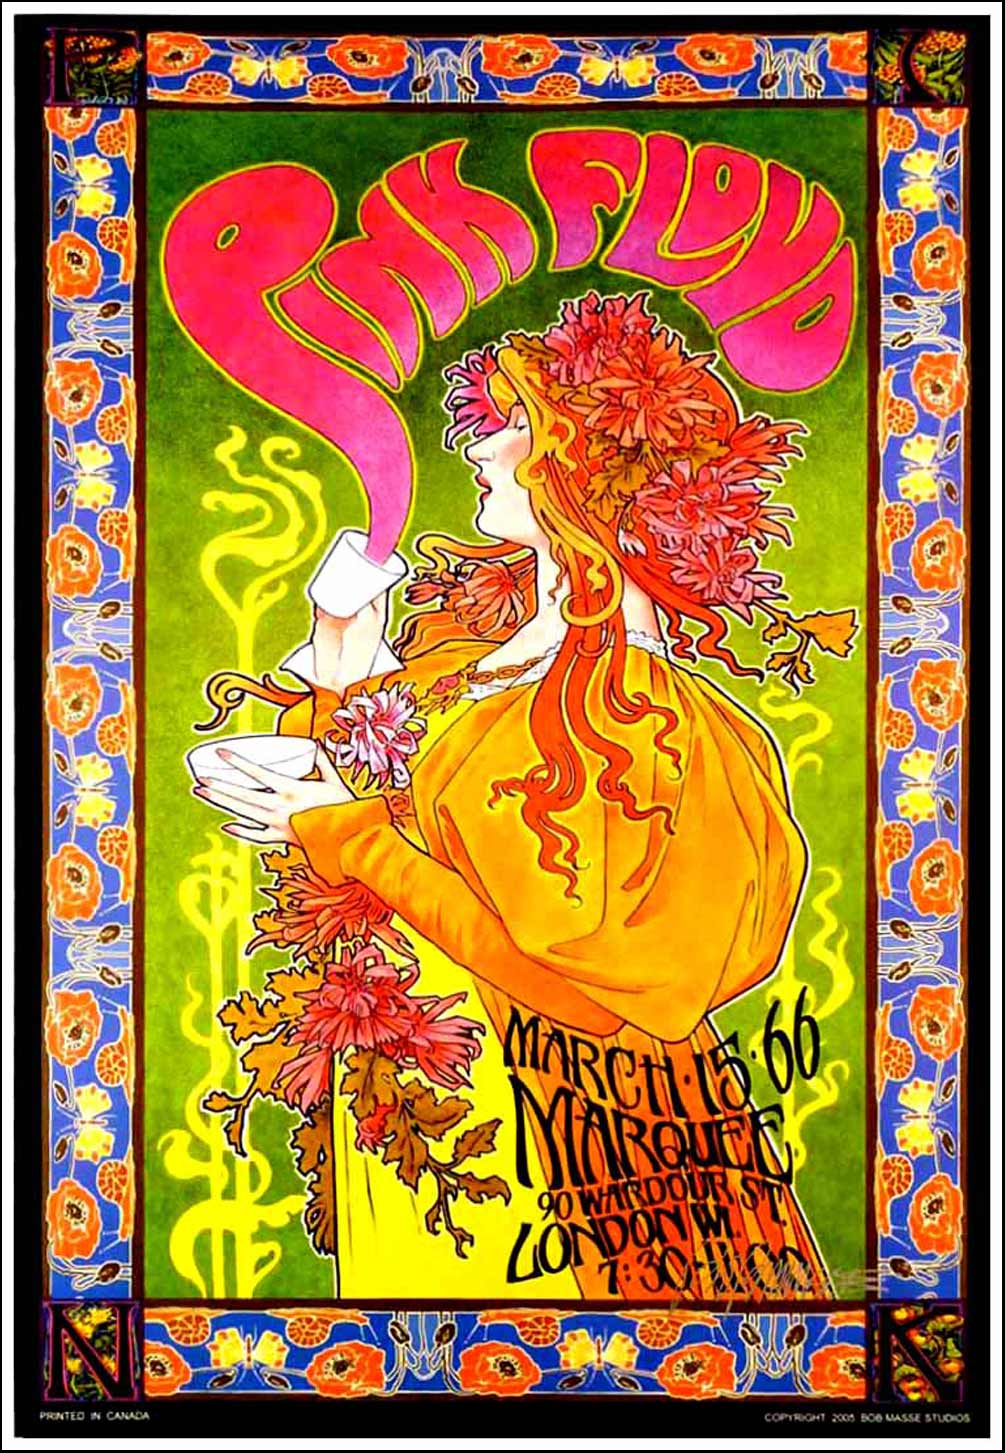 Art Nouveau and 1960s: A Psychedelic Dream